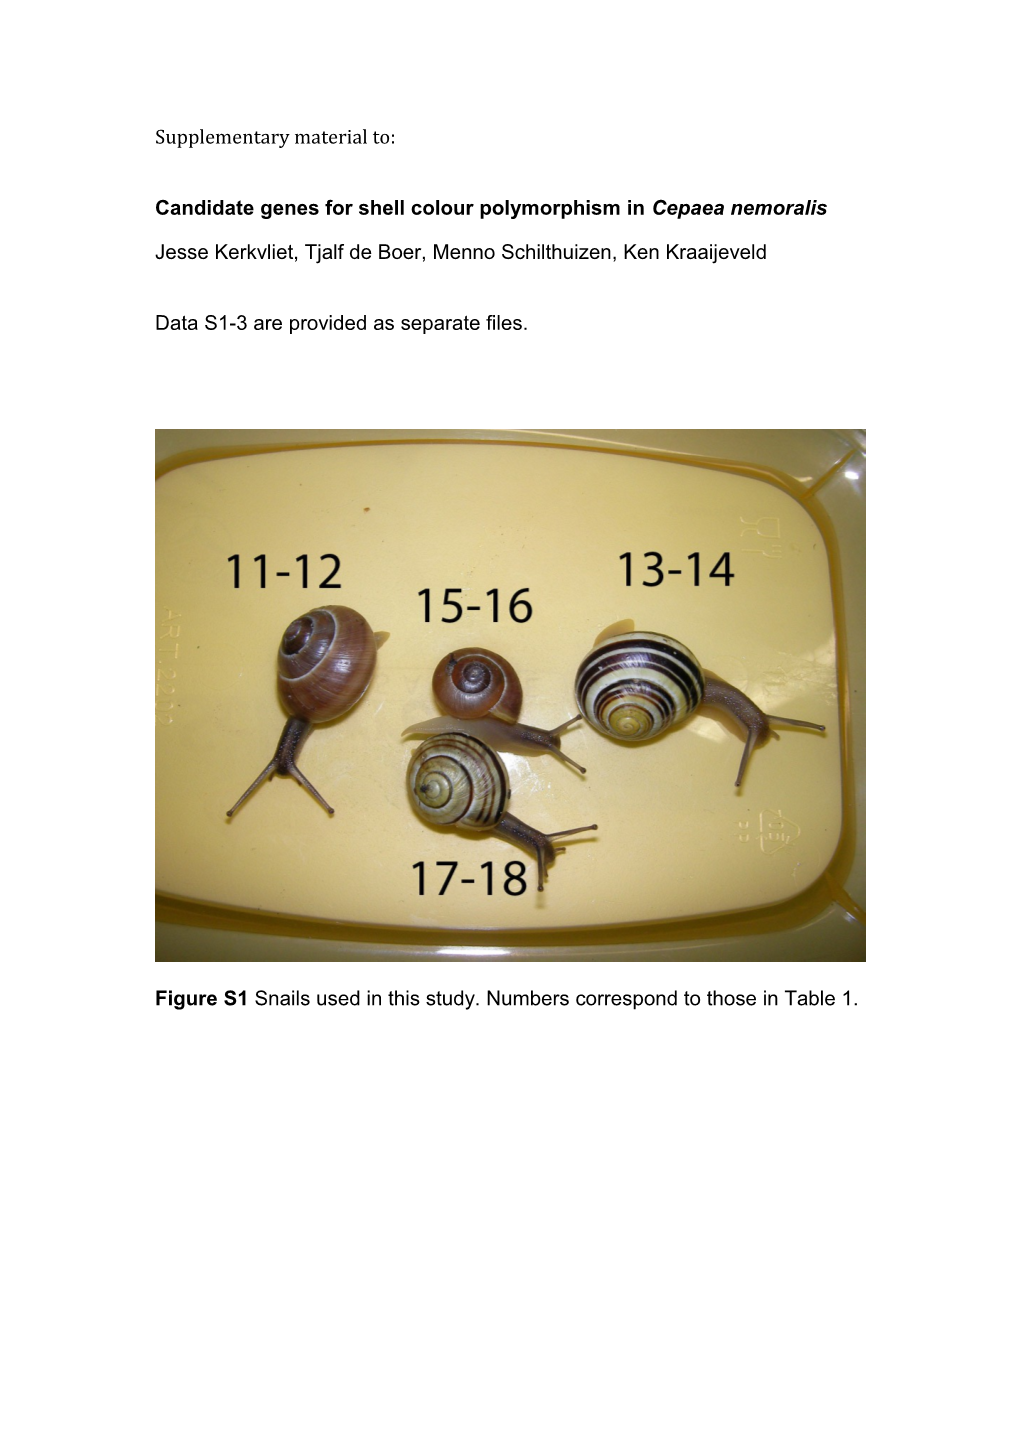 Candidate Genes for Shell Colour Polymorphism in Cepaea Nemoralis